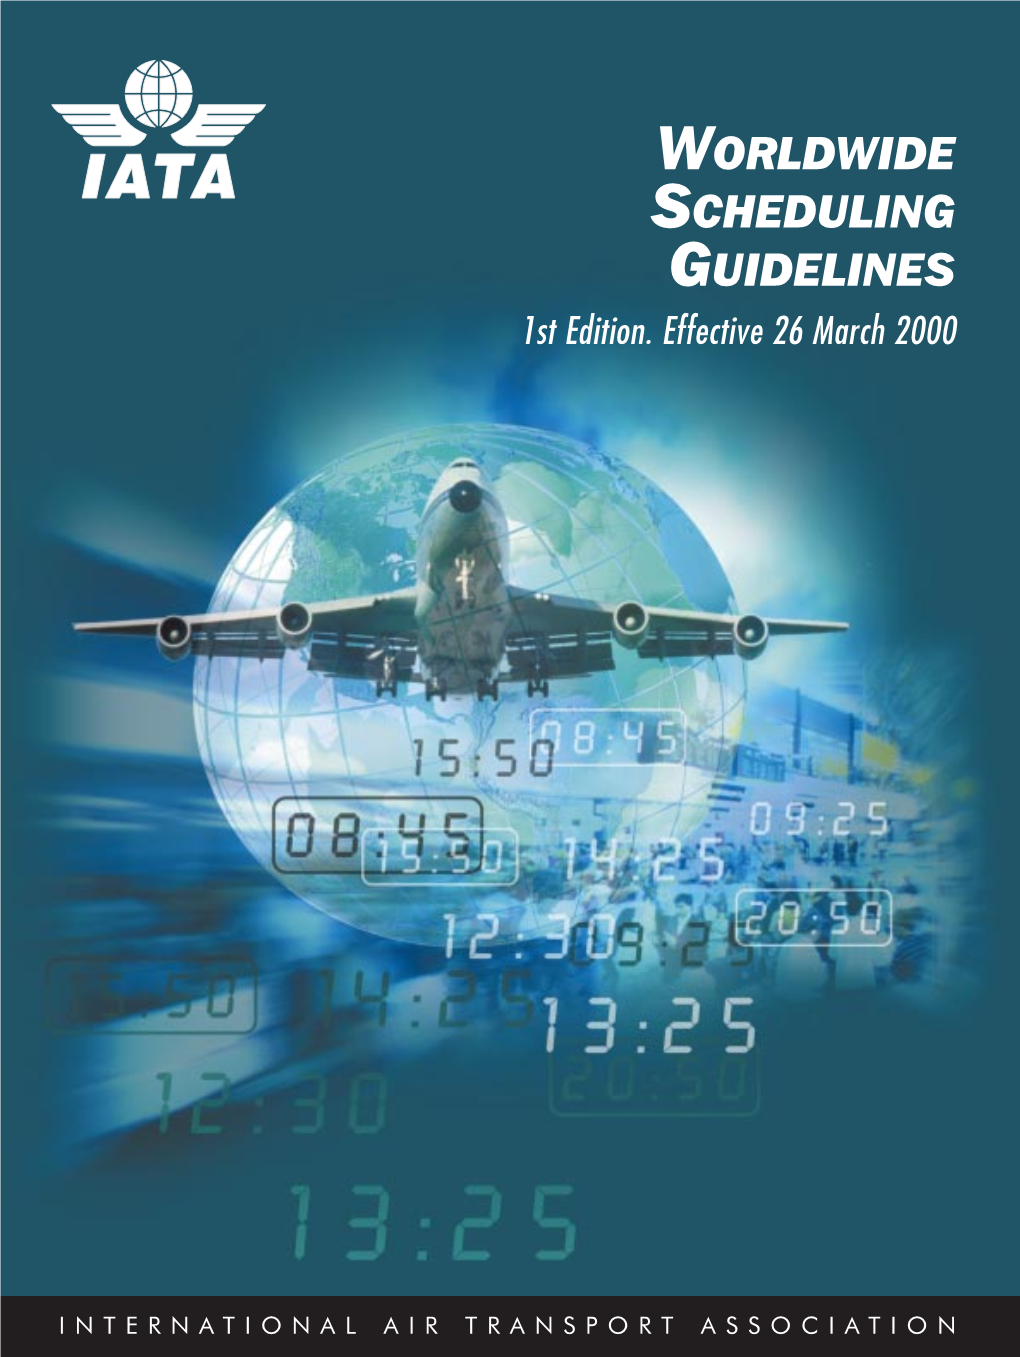 WORLDWIDE SCHEDULING GUIDELINES 1St Edition